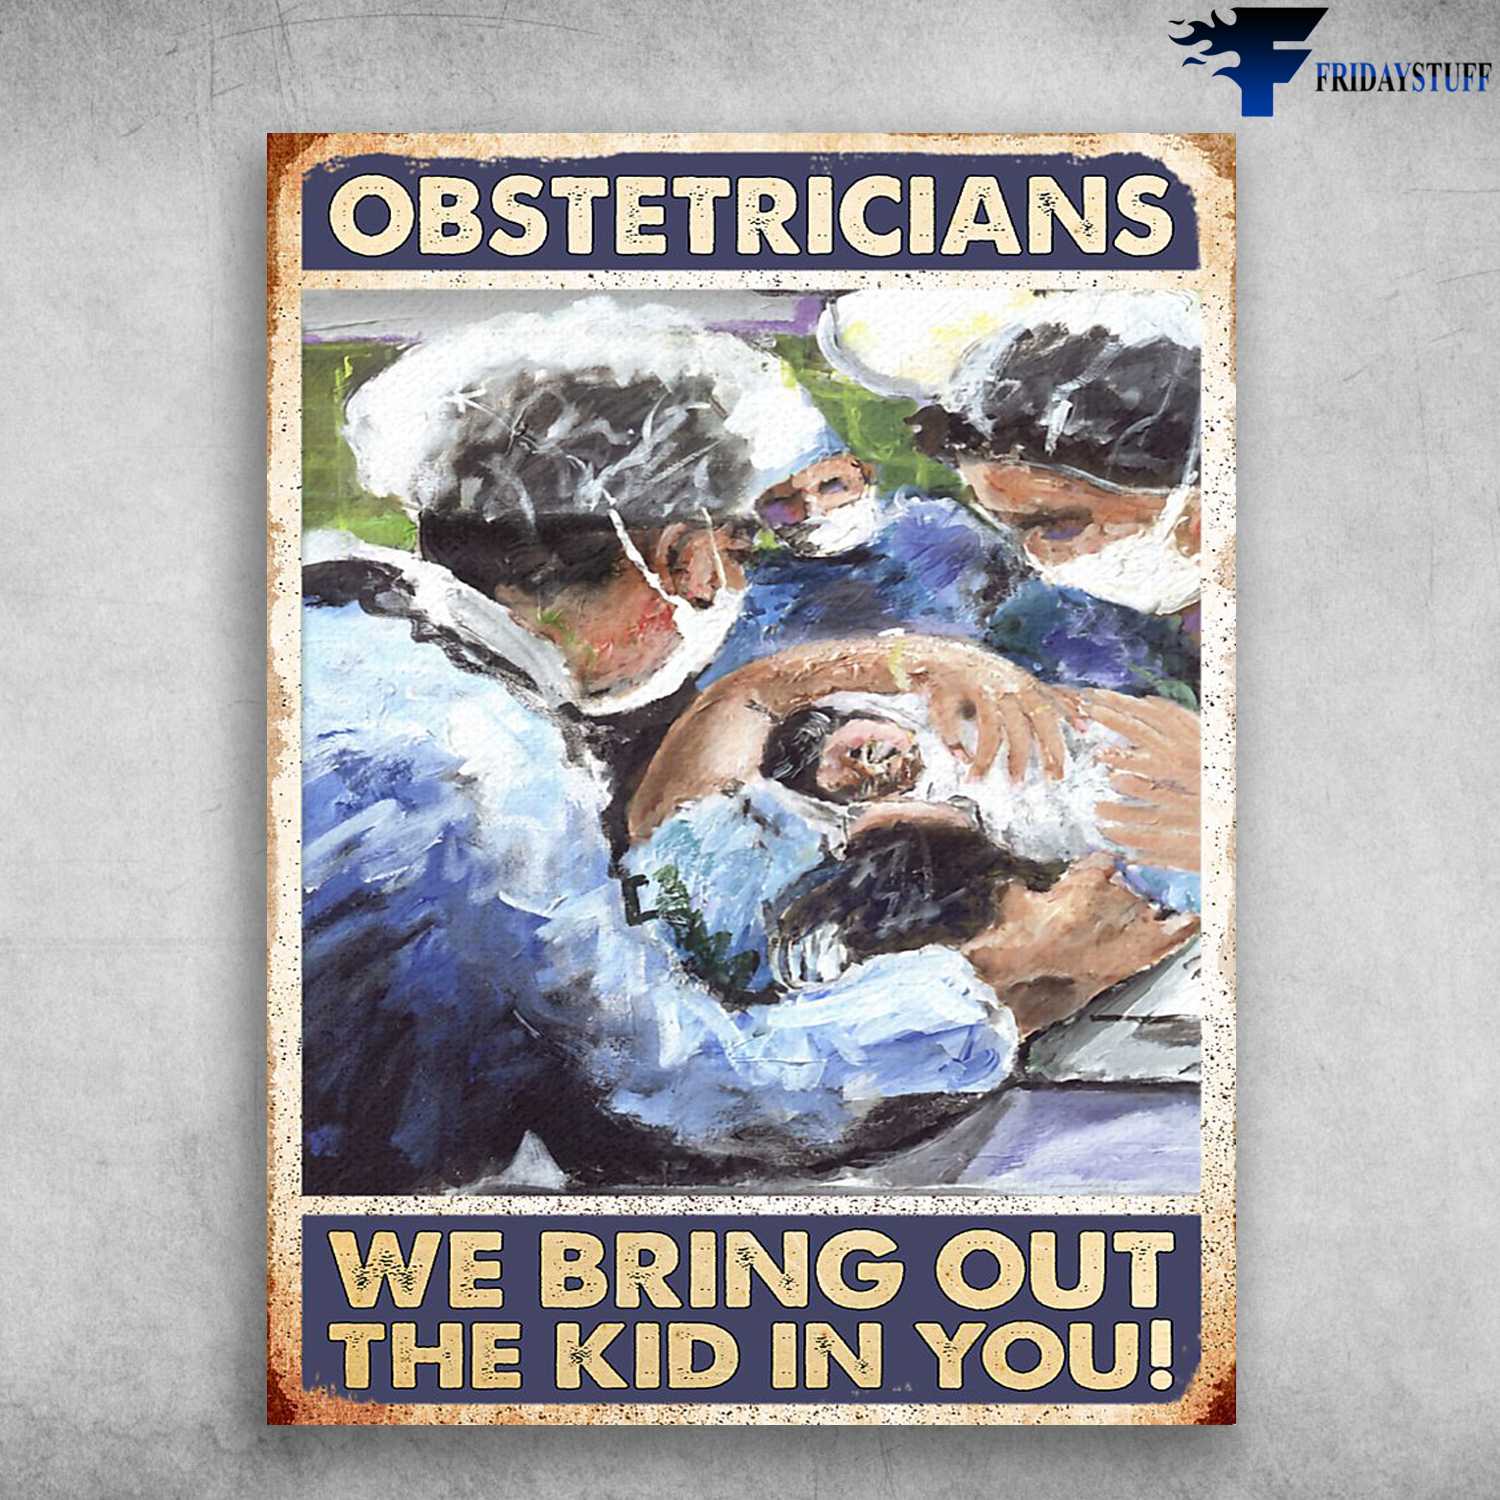 Obstetrics Poster - Obstetricians, We Bring Out The Kid In You